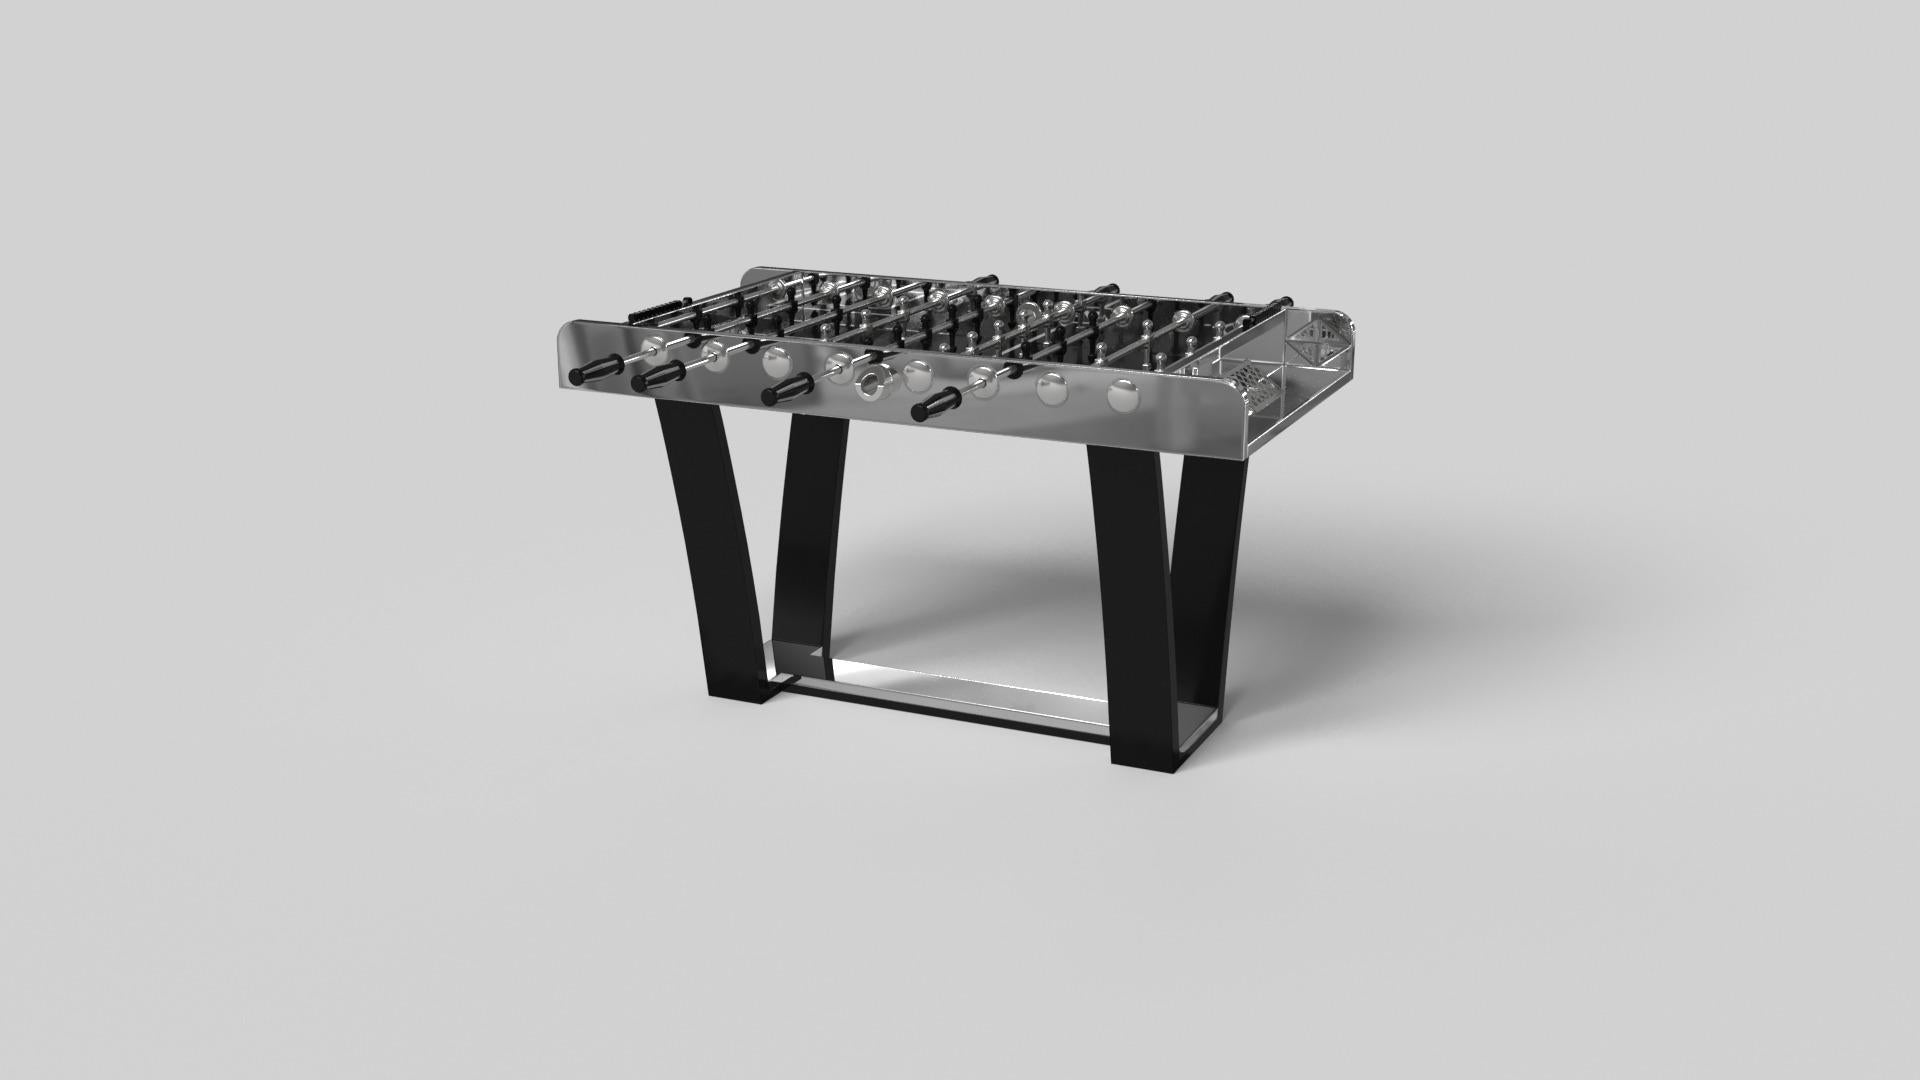 With an I-shaped metal base, slightly sloped metal legs, and a contrasting wood top, the Elite foosball table exudes modern sophistication while evoking a sense of art deco design. This table is a confluence of style, made to meet today's demands